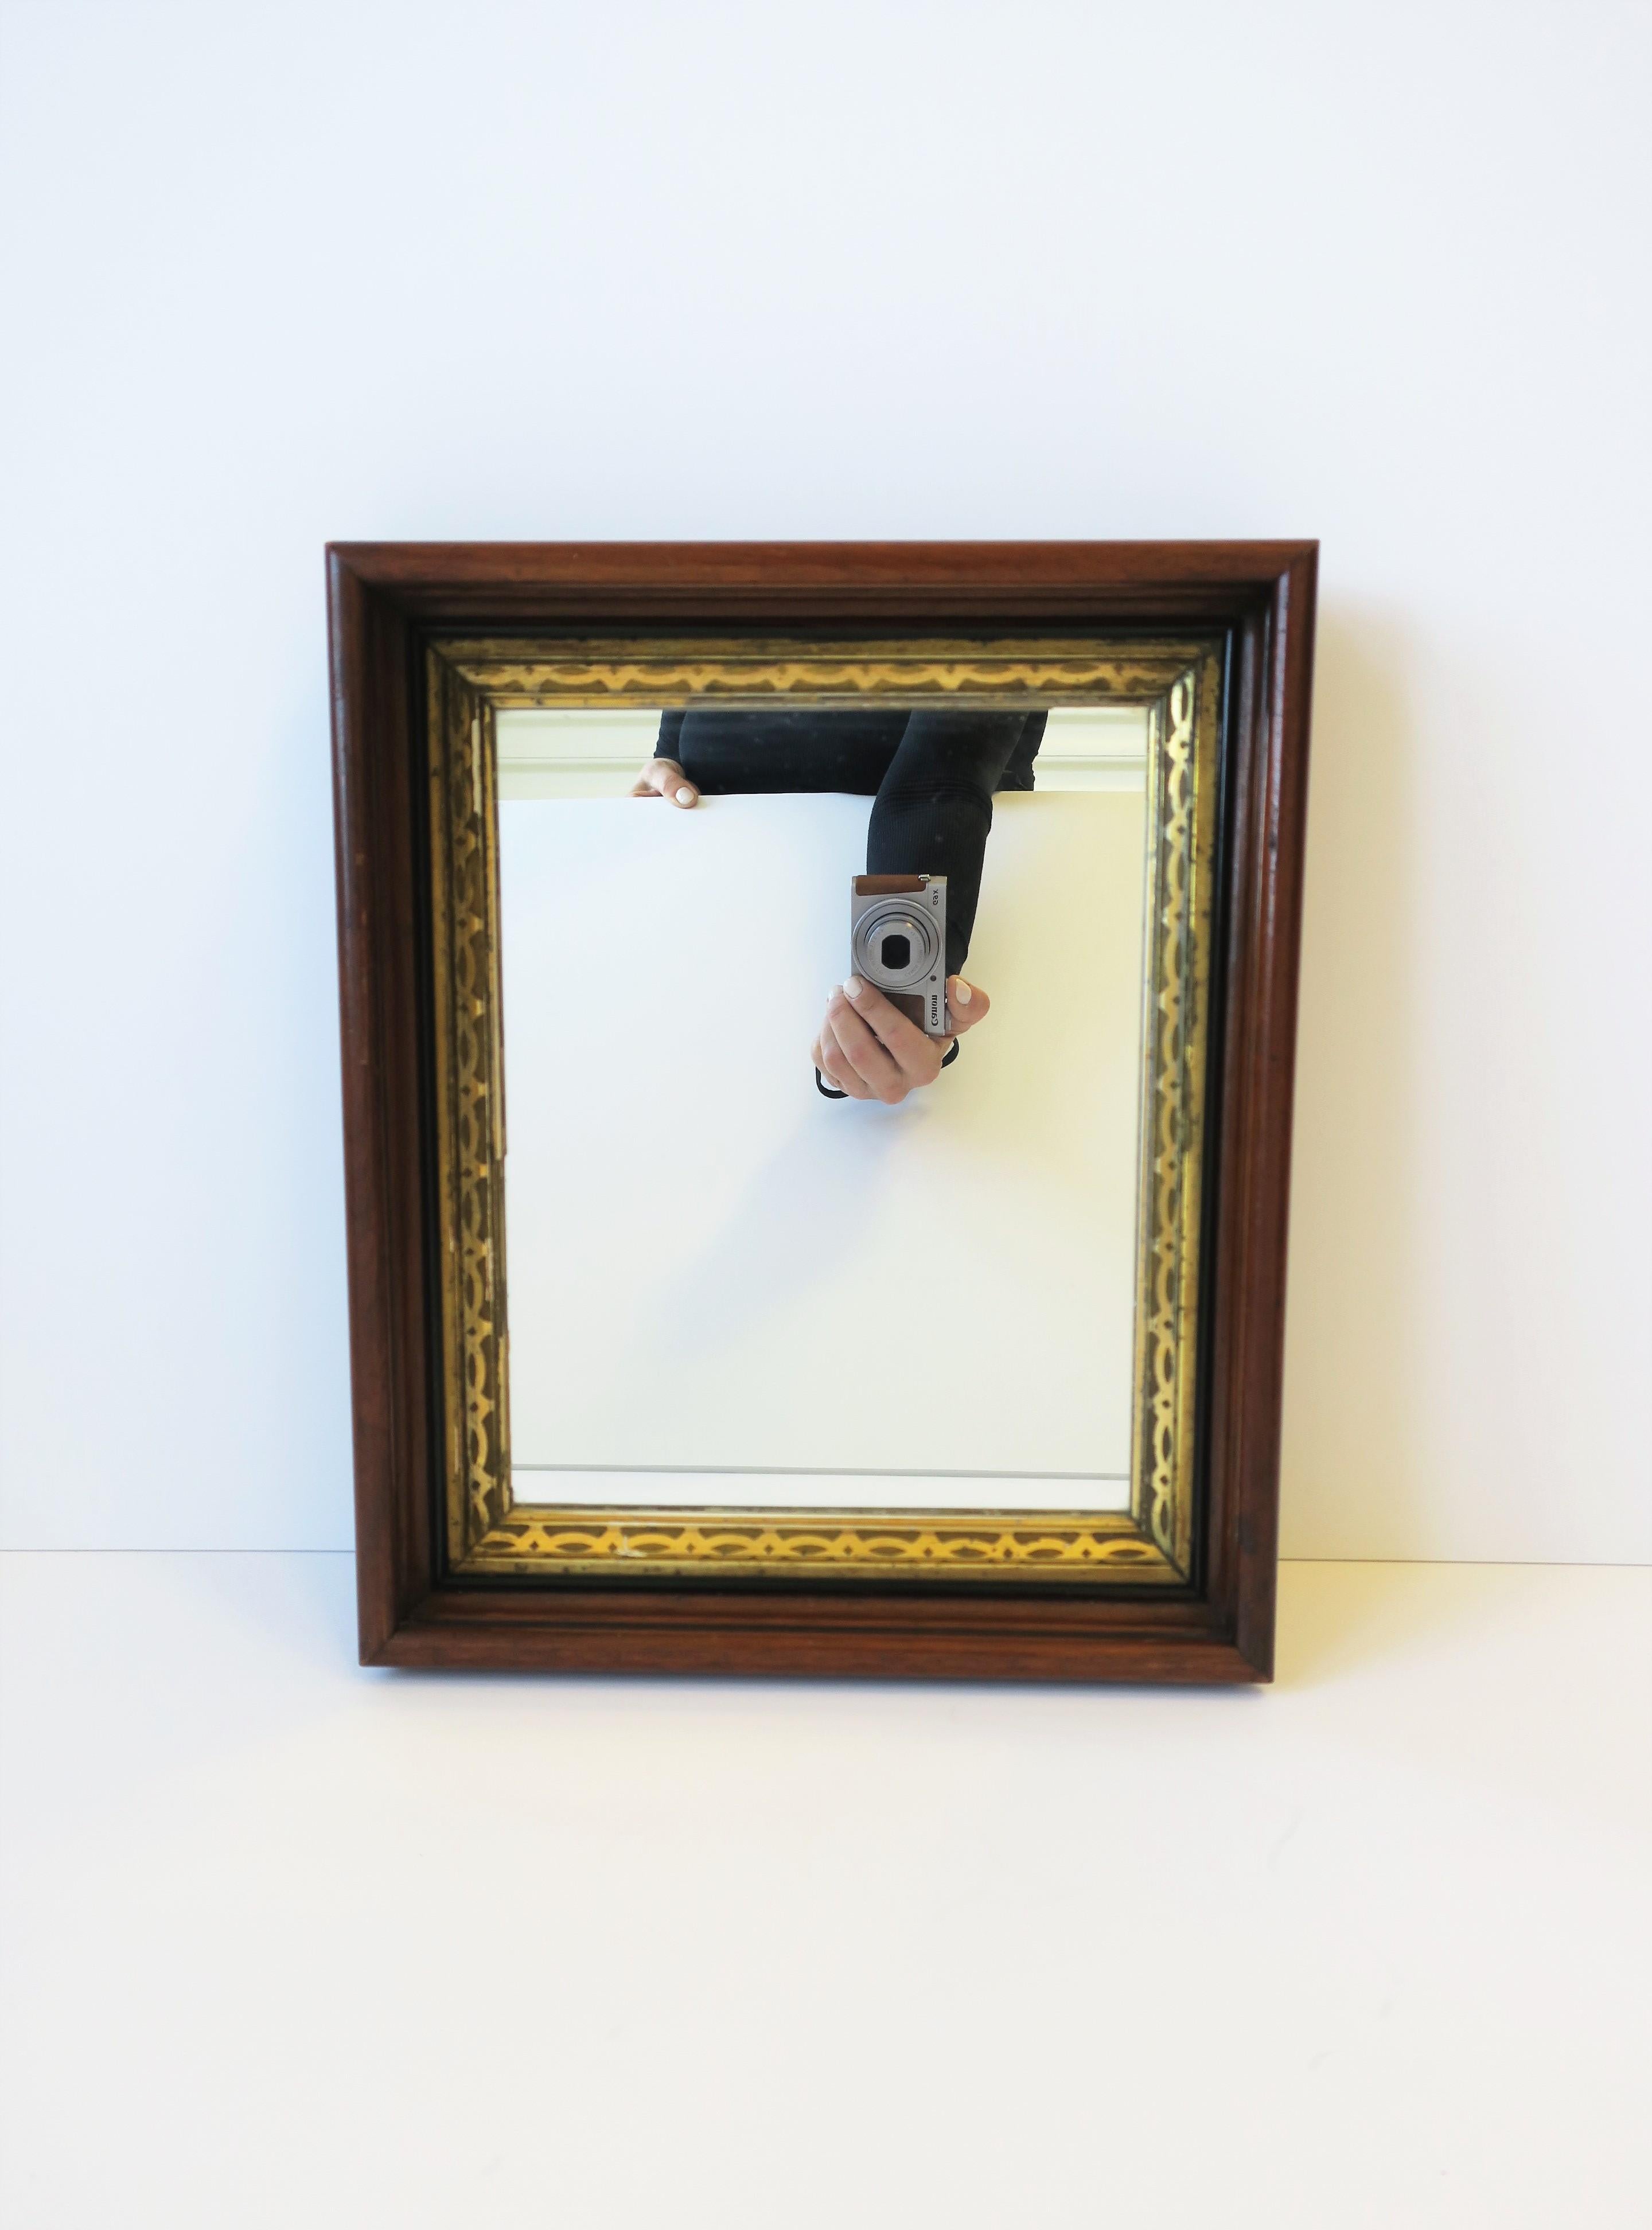 A beautiful wall mirror with a rich brown wood and gold giltwood frame, circa early to mid-20th century. Handmade frame is brown, black and gold, and ready to hang as shown in last image. A great piece for a hall wall, vanity, bathroom, or